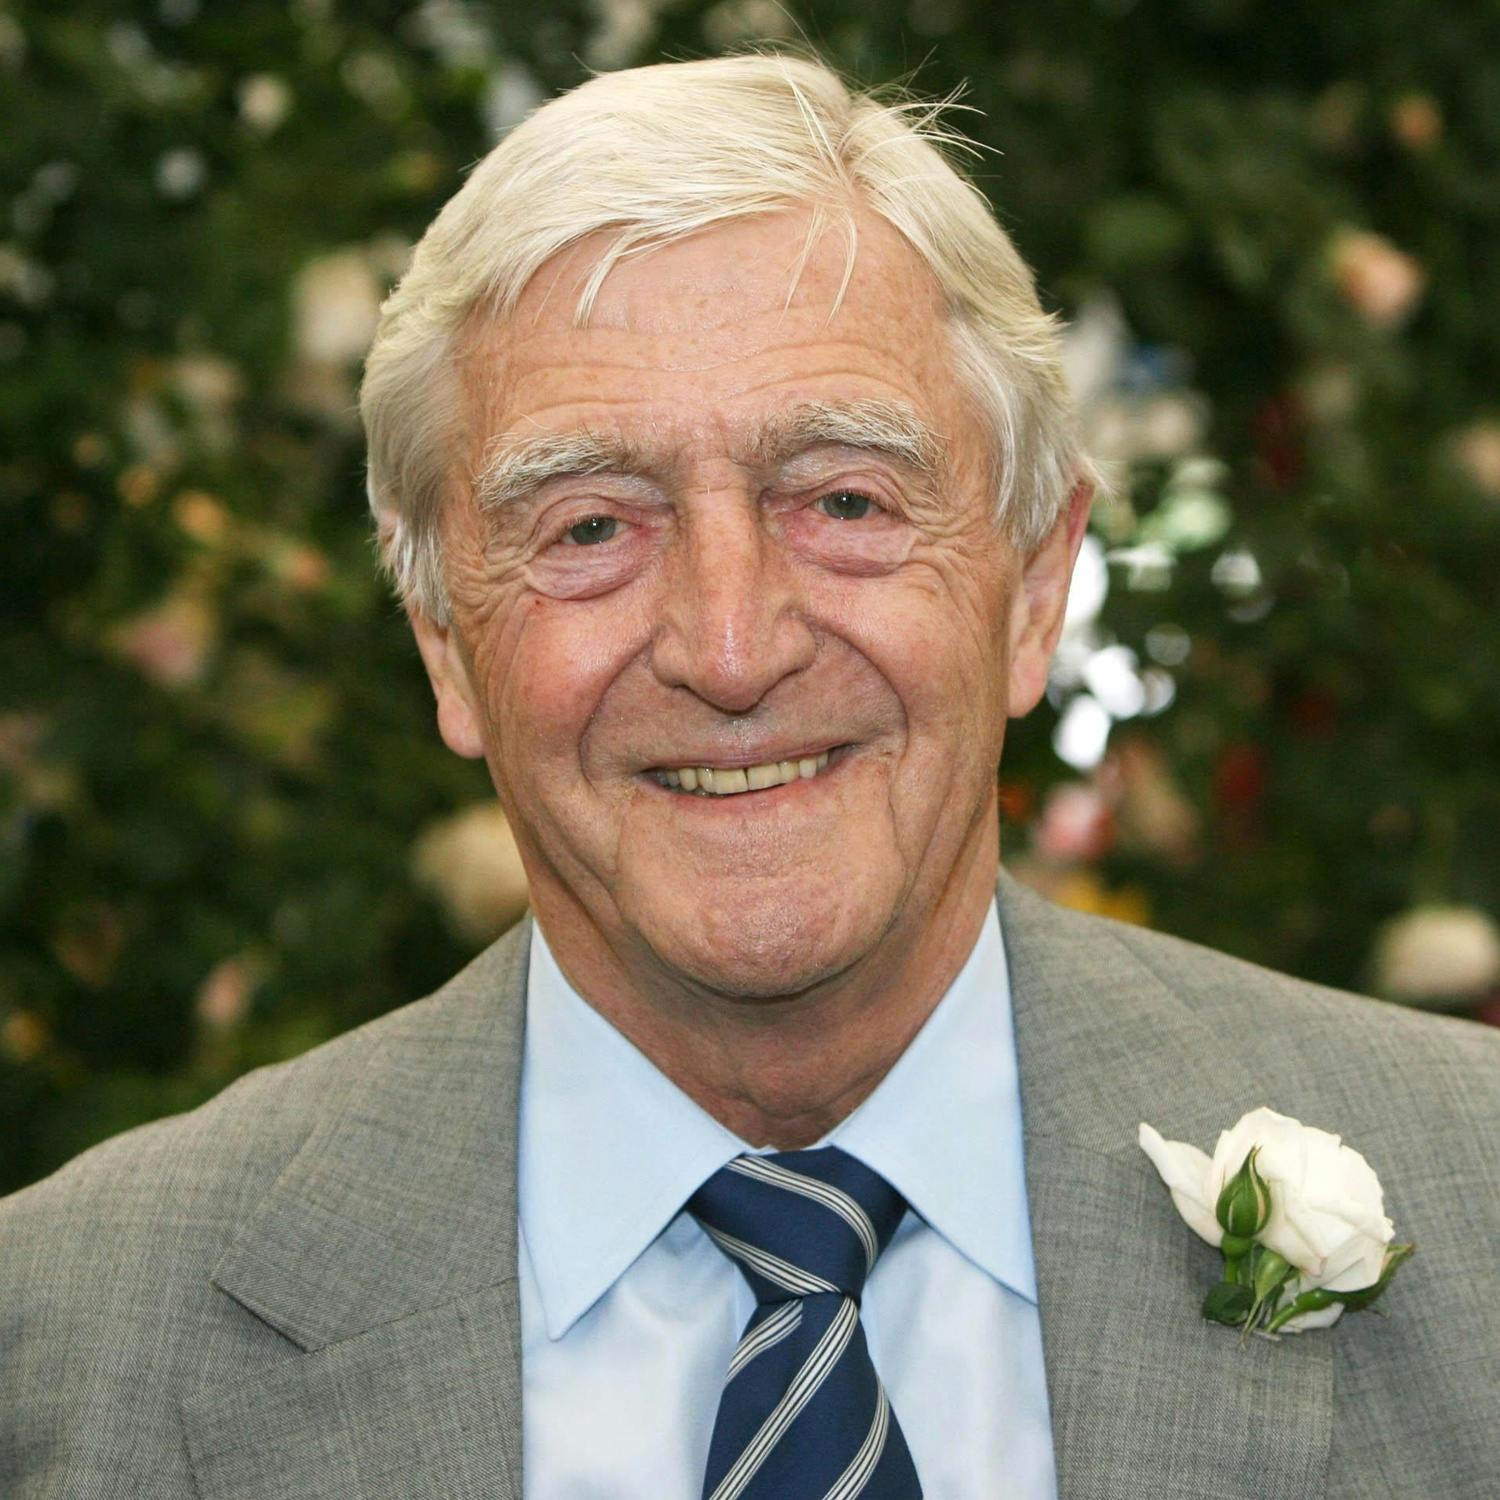 Remembering The Life And Work Of Michael Parkinson